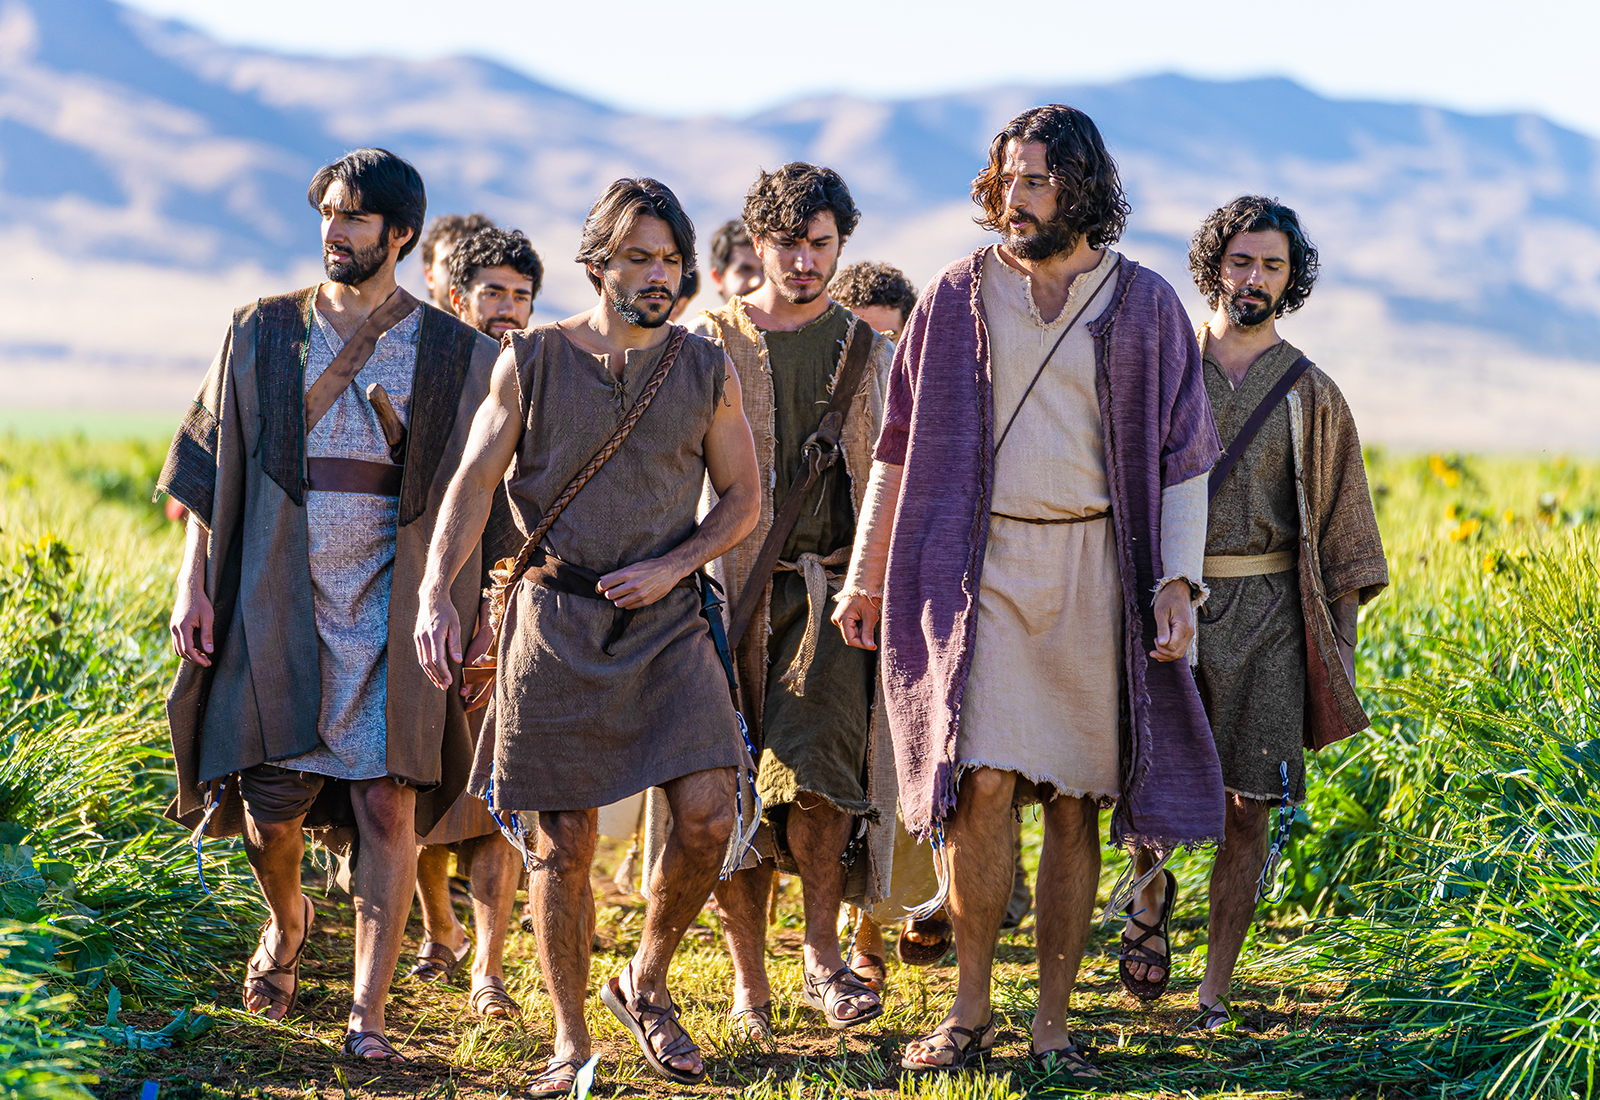 Jonathan Roumie, second from right, portrays Jesus Christ in the series “The Chosen.” Photo courtesy of Angel Studios